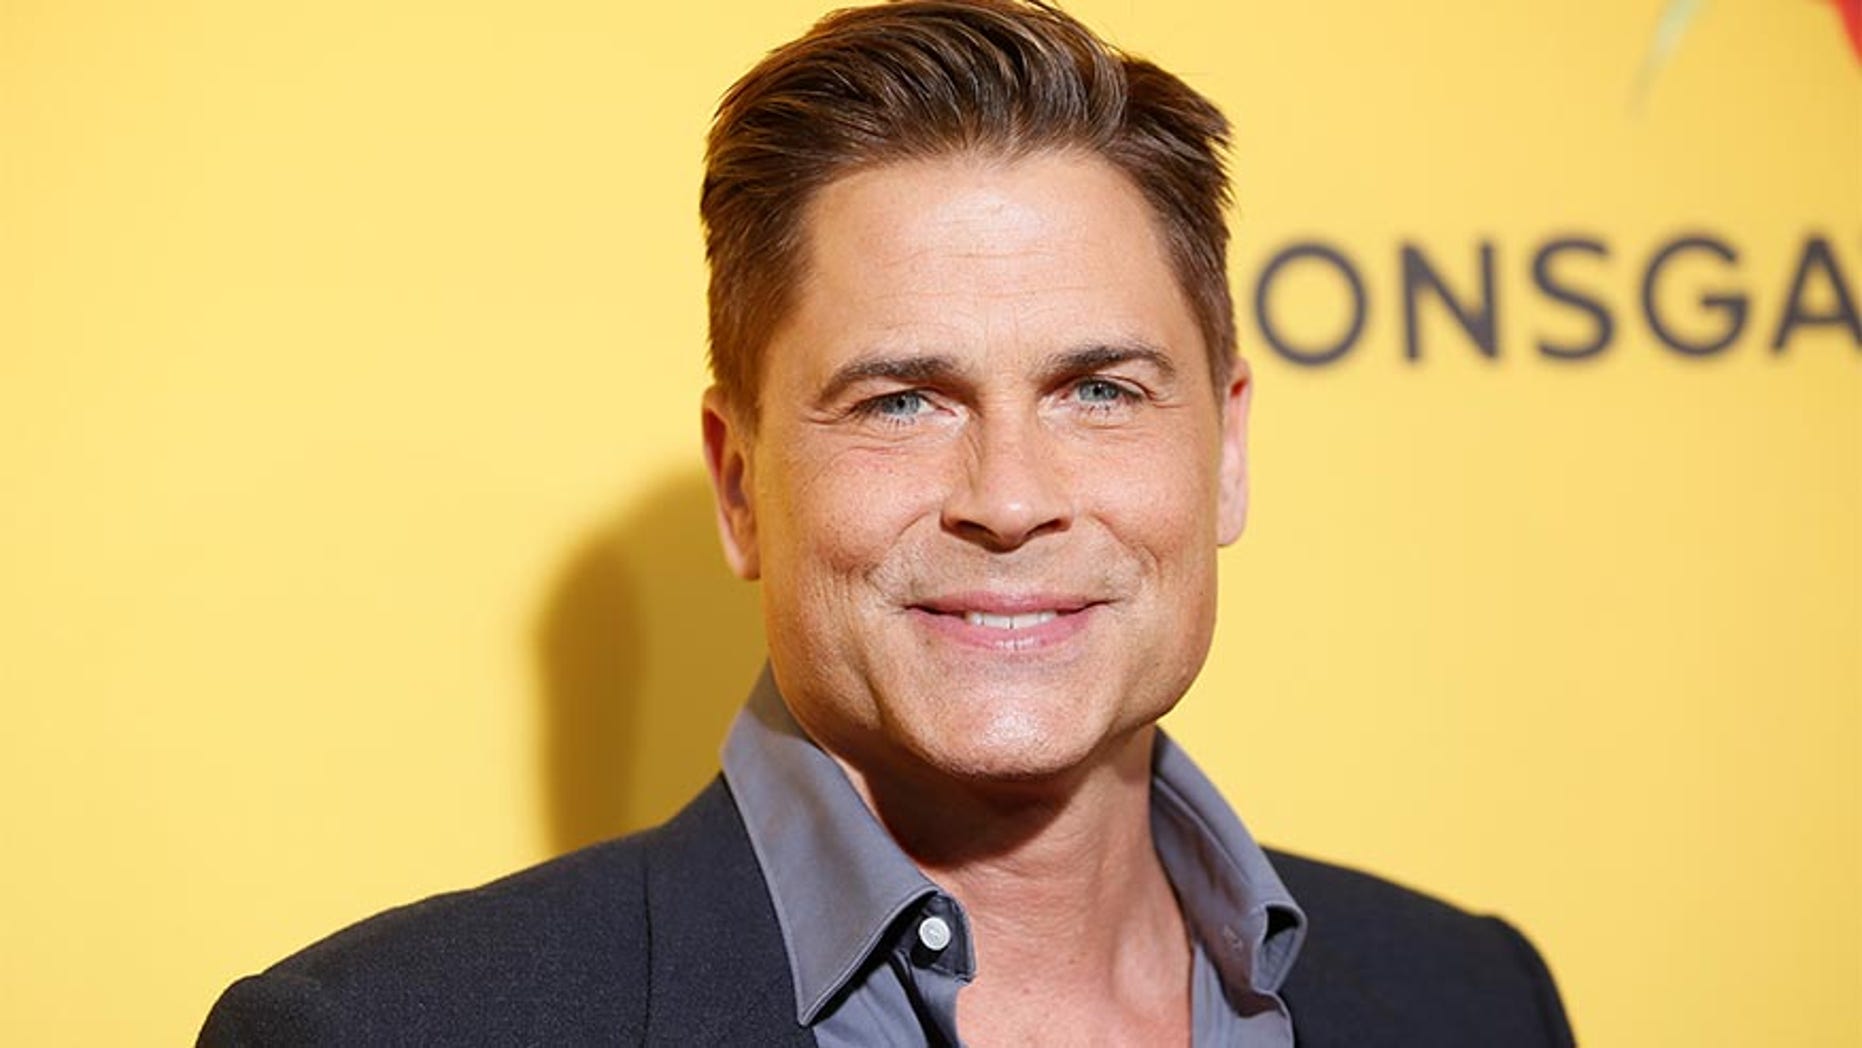 Rob Lowe's tweet about Sen. Elizabeth Warren was not well-received by some in Hollywood. (Reuters)